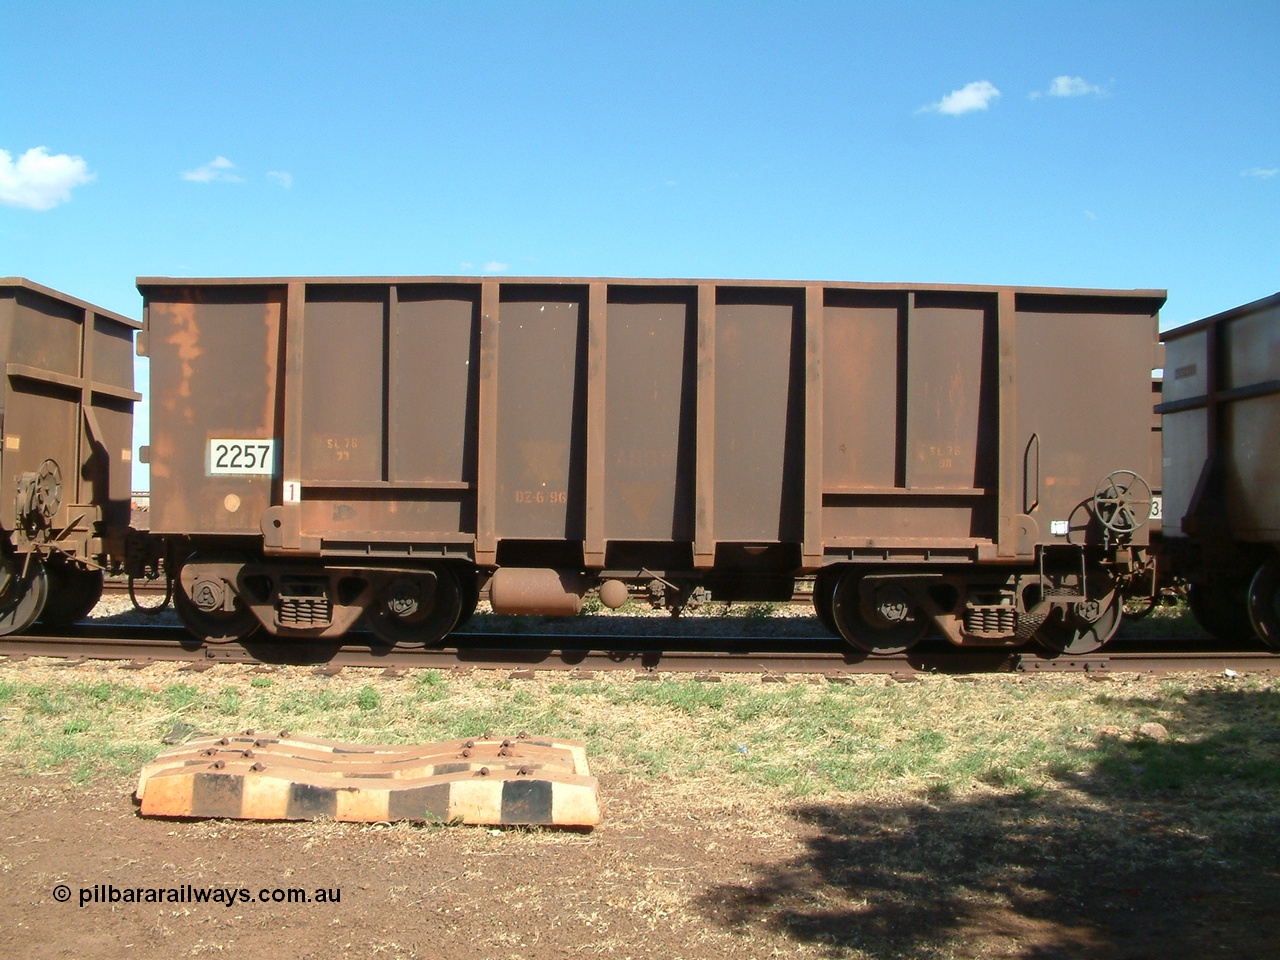 040412 144448
Nelson Point, Comeng WA built ore waggon 2257 one of 183 waggons built in 1970. 12th April 2004.
Keywords: 2257;Comeng-WA;BHP-ore-waggon;